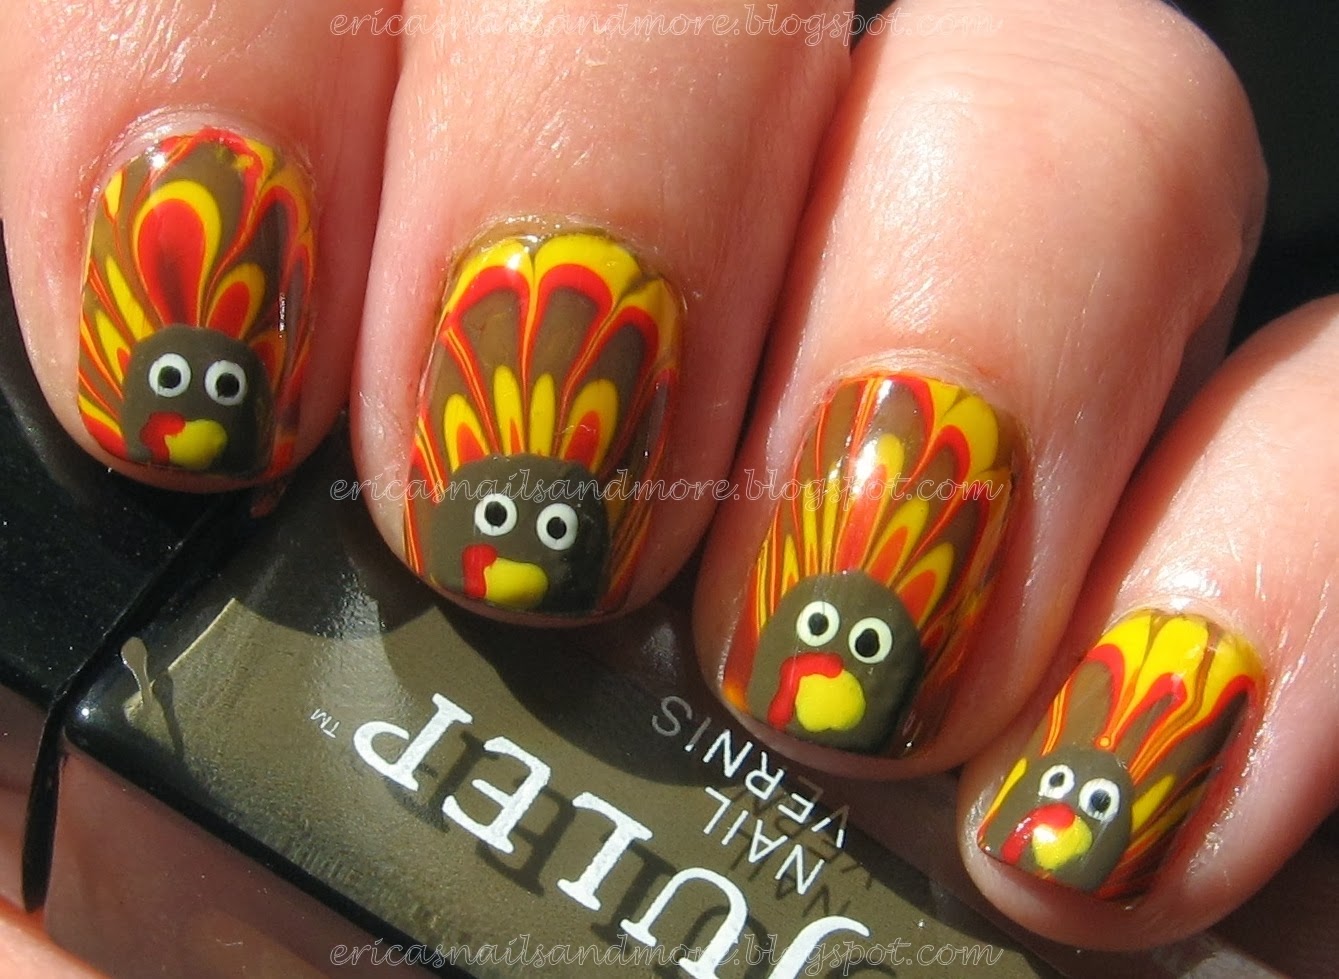 Erica's Nails and More: Happy Thanksgiving